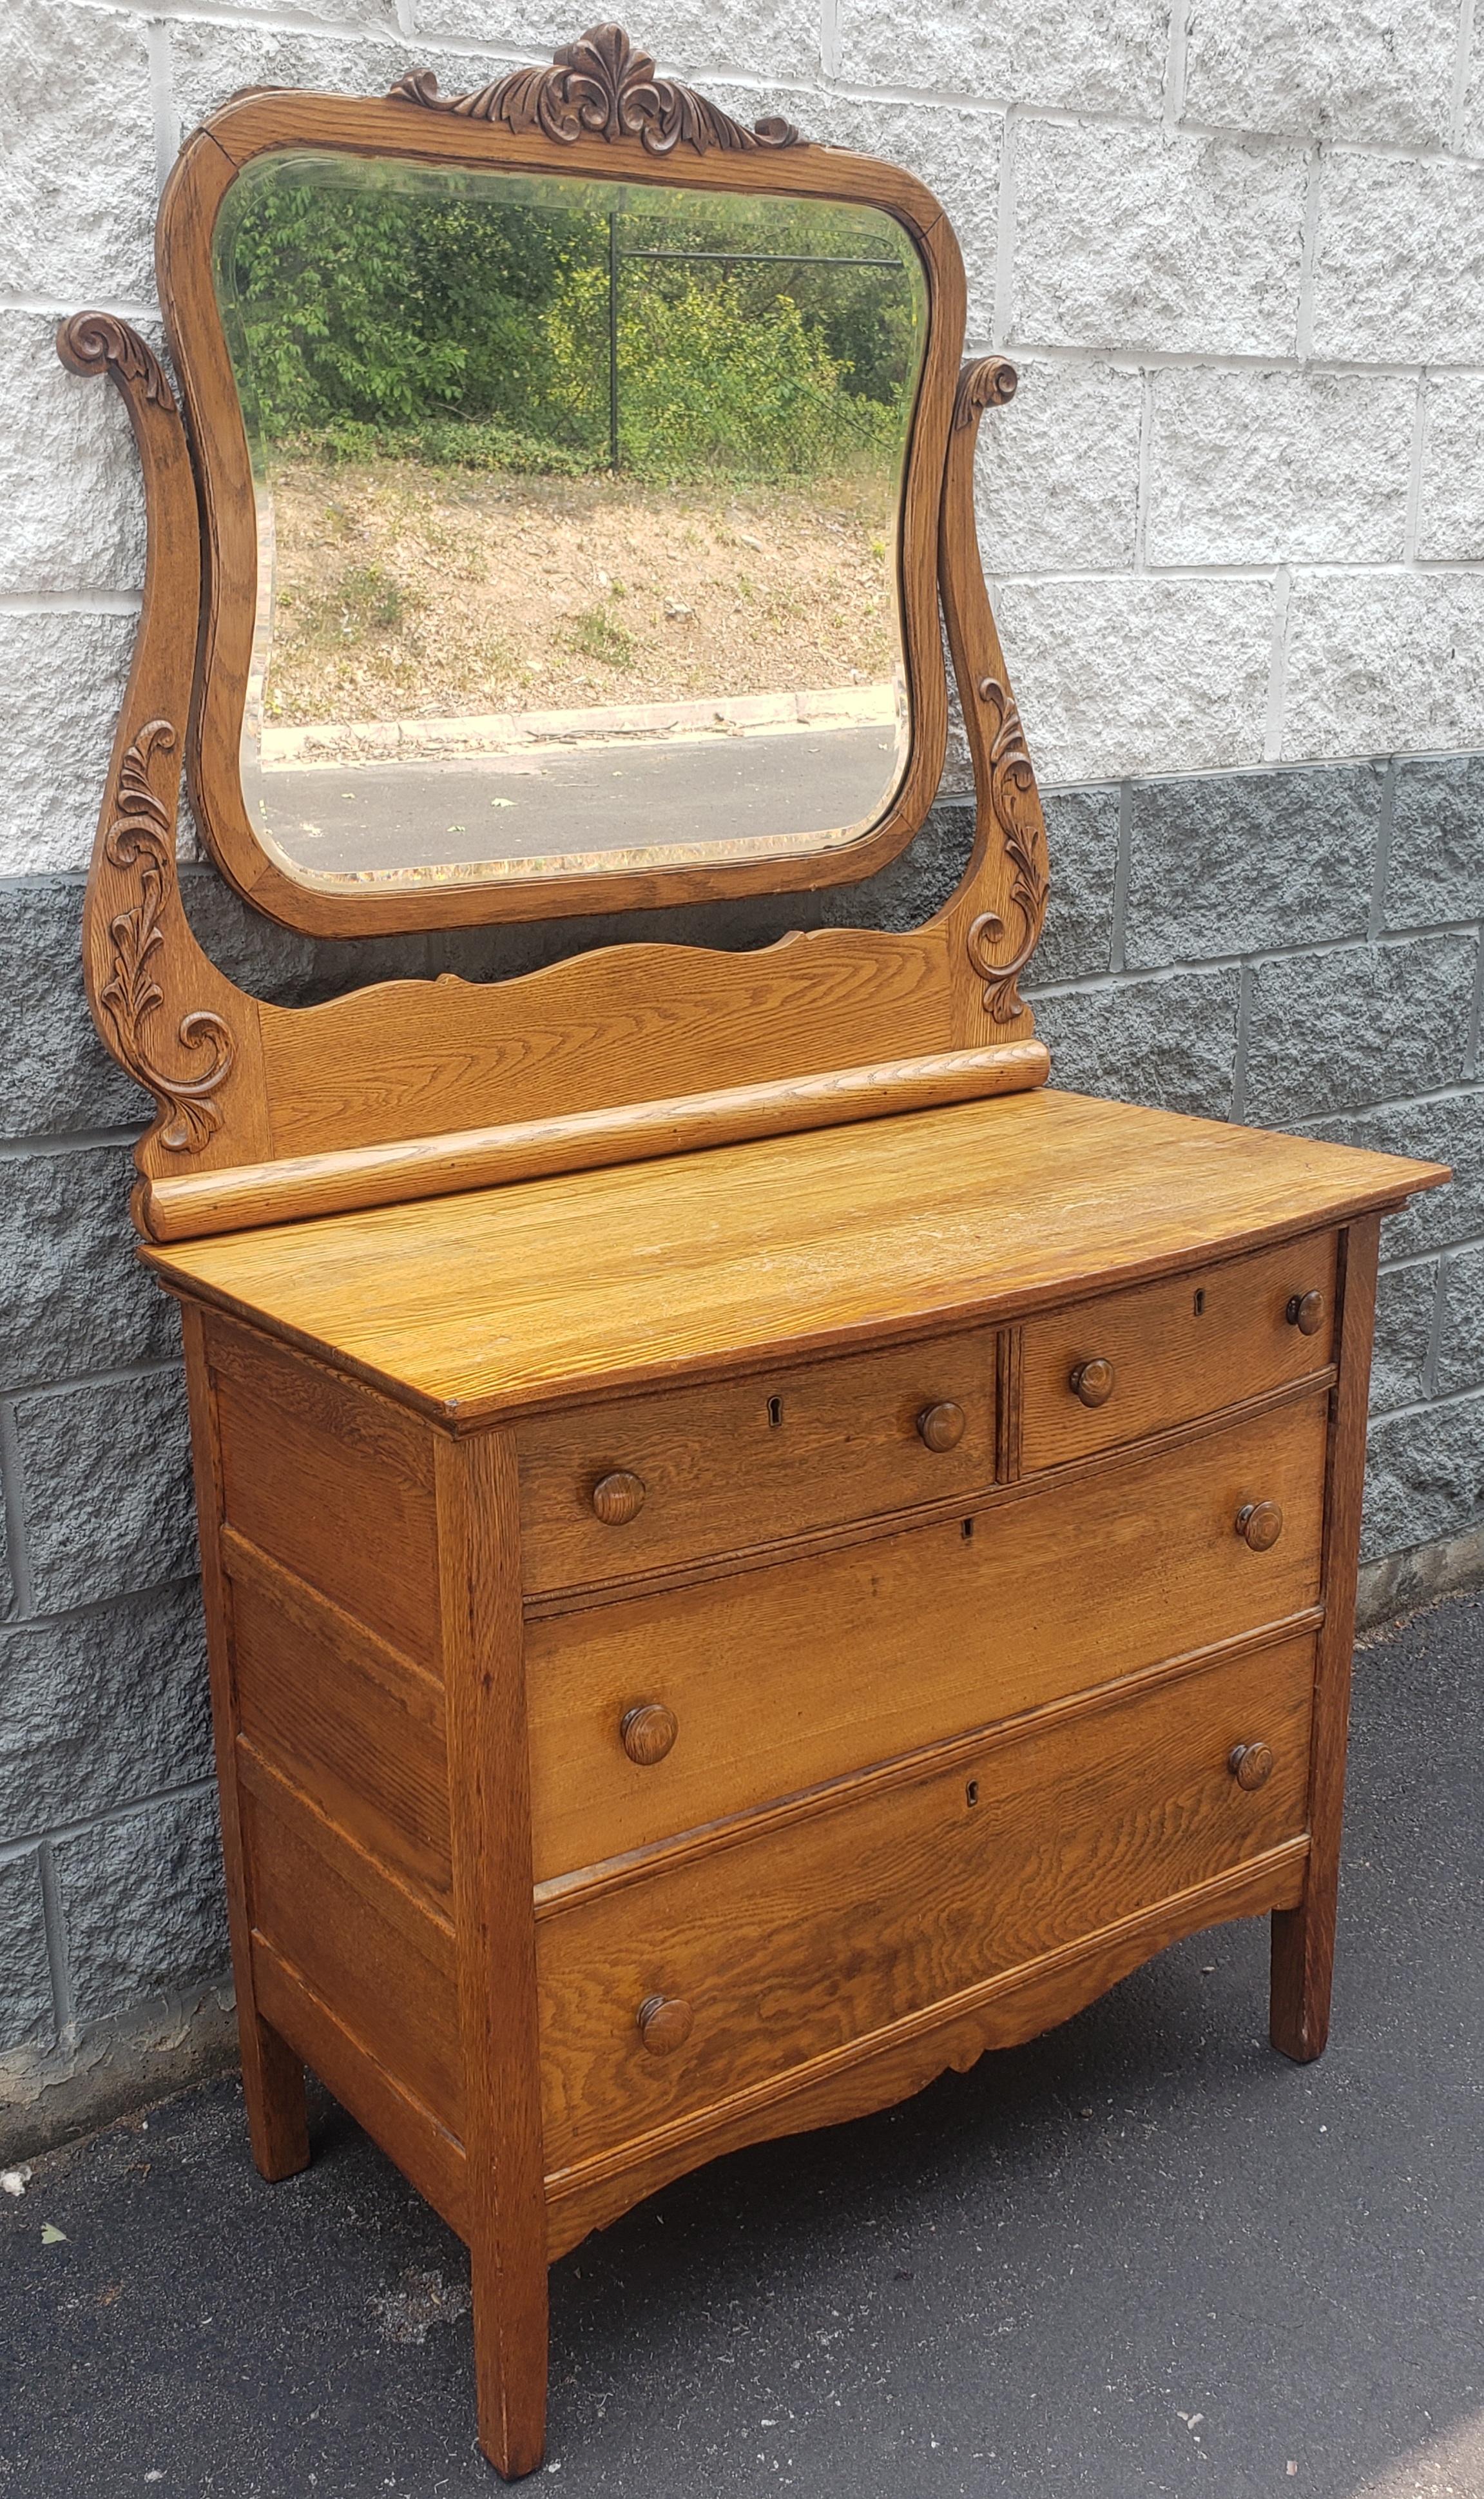 A Late 19th century Victorian Carved Tiger Oak Dresser with Mirror. Good condition. Measures 38